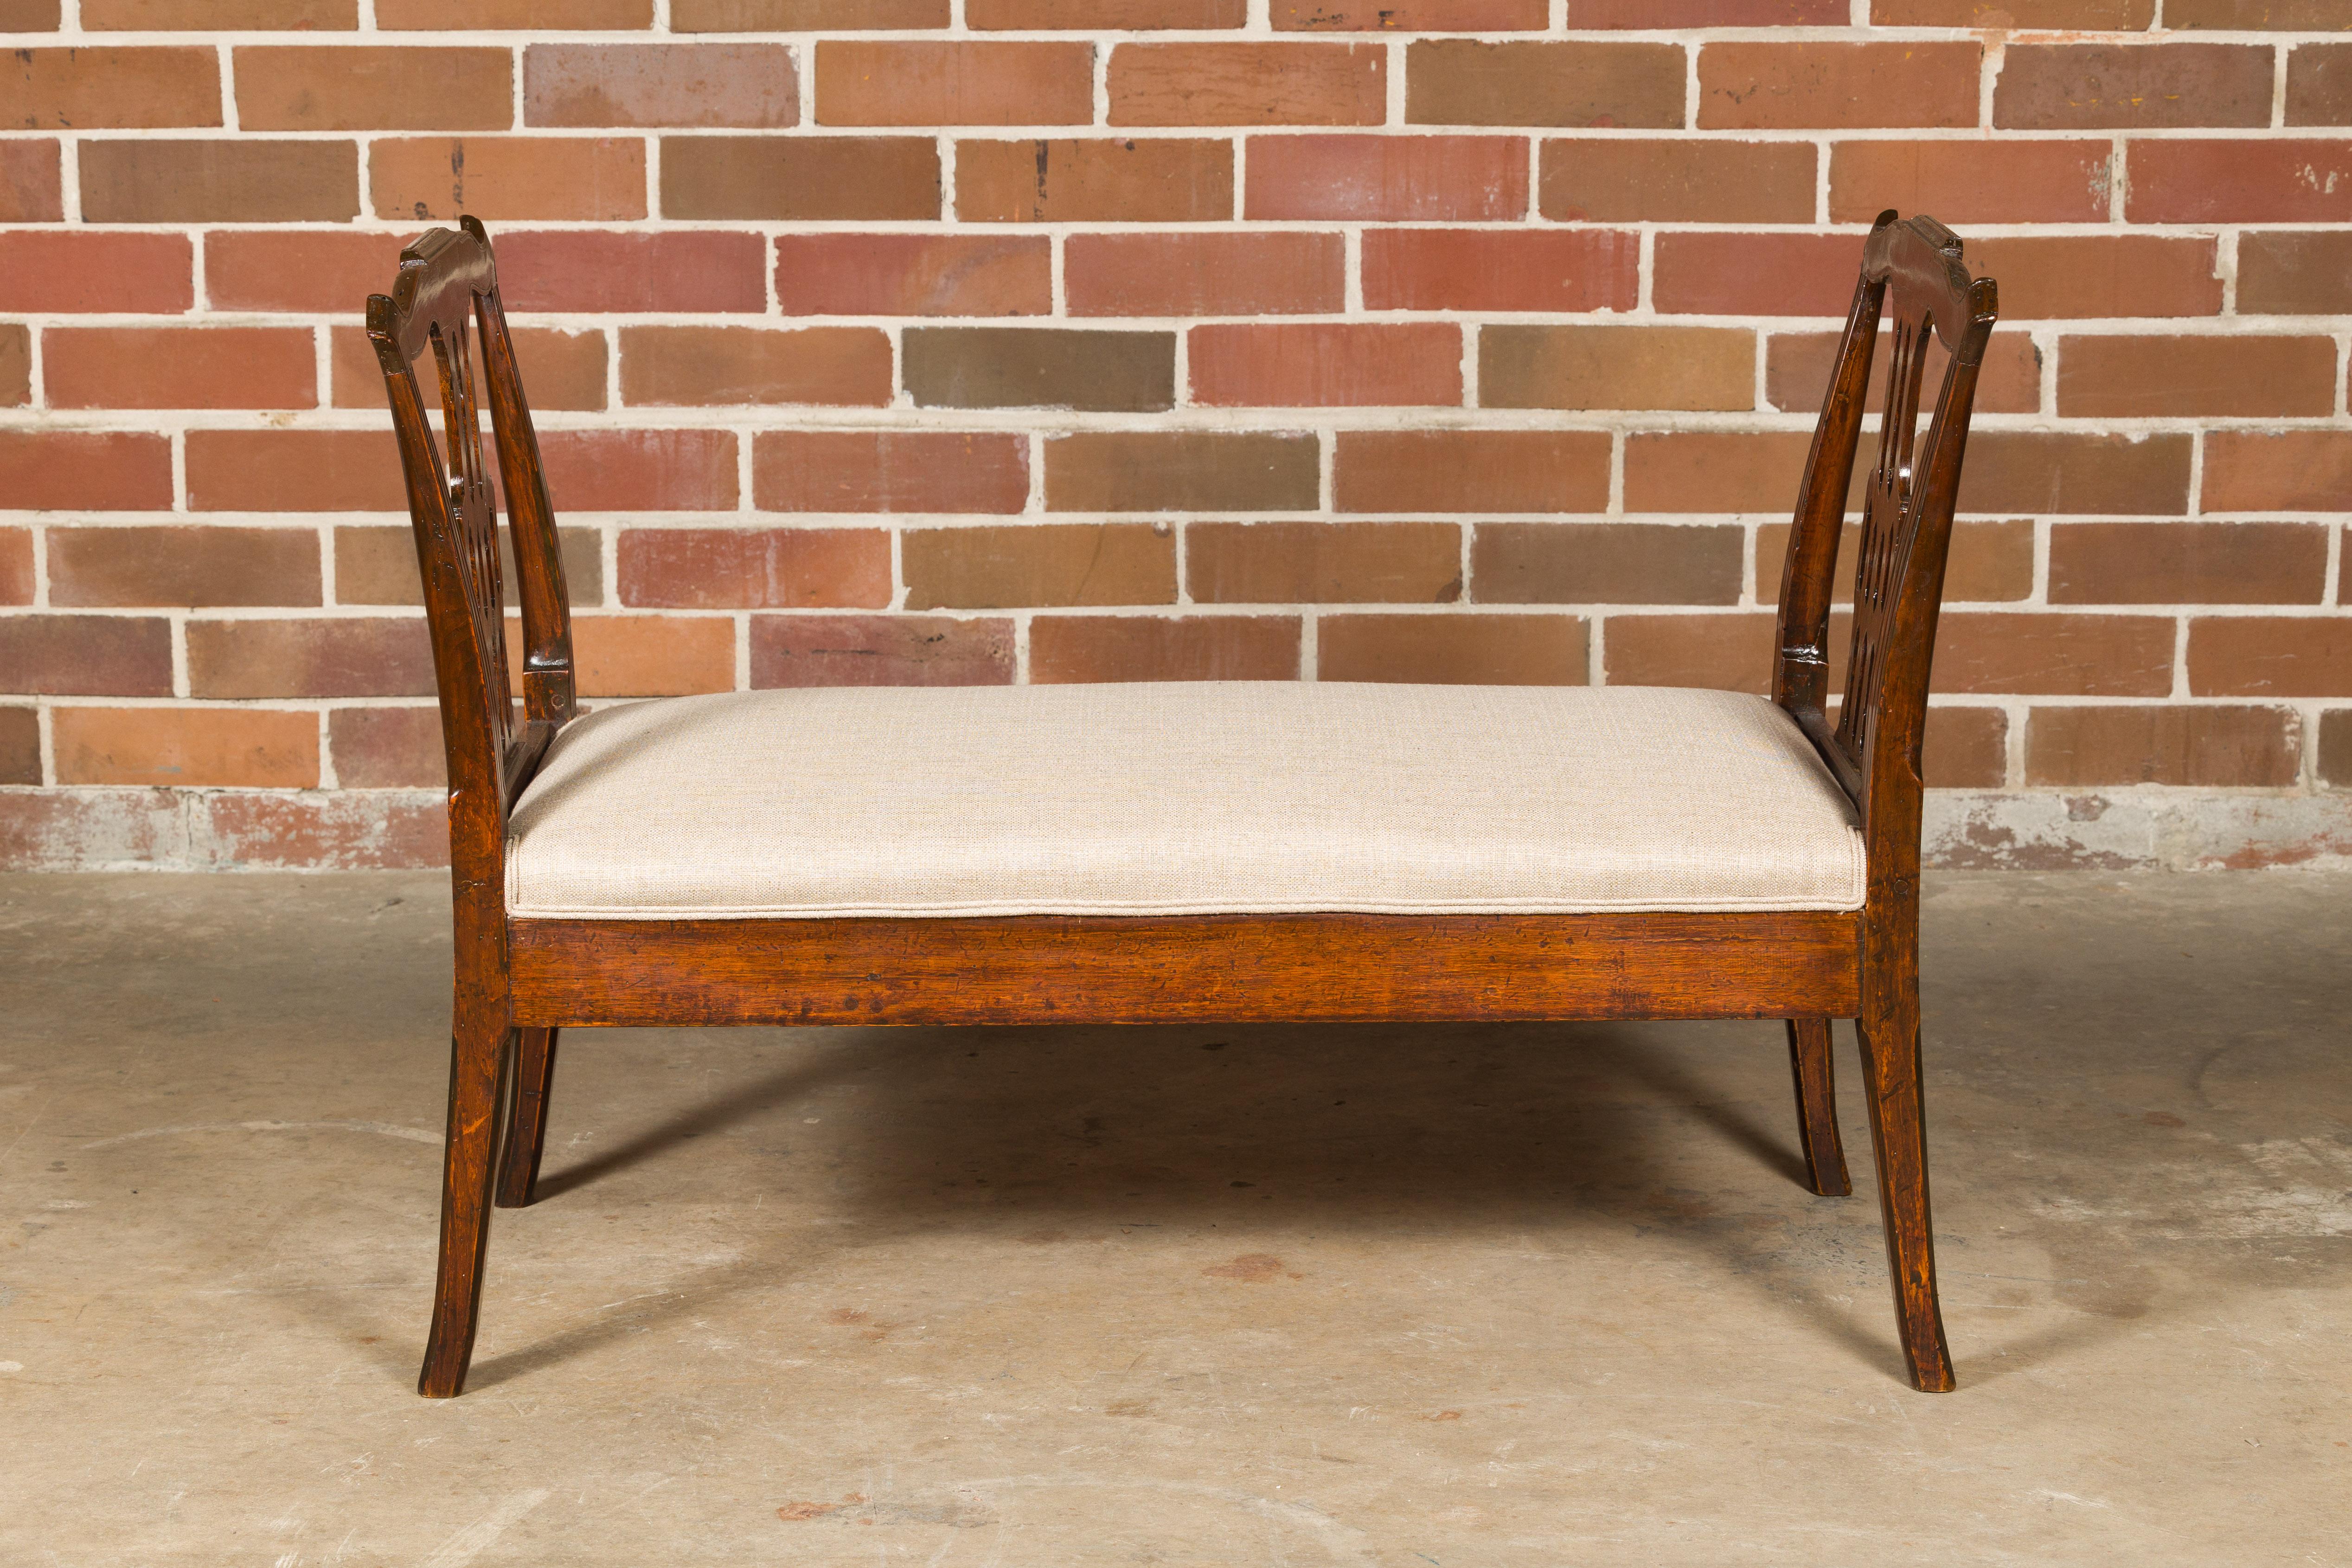 An English wooden bench from the 19th century with carved side supports, saber legs and new custom linen upholstery. This 19th-century English wooden bench is a timeless blend of elegance and functionality. Its classic design, with gracefully carved